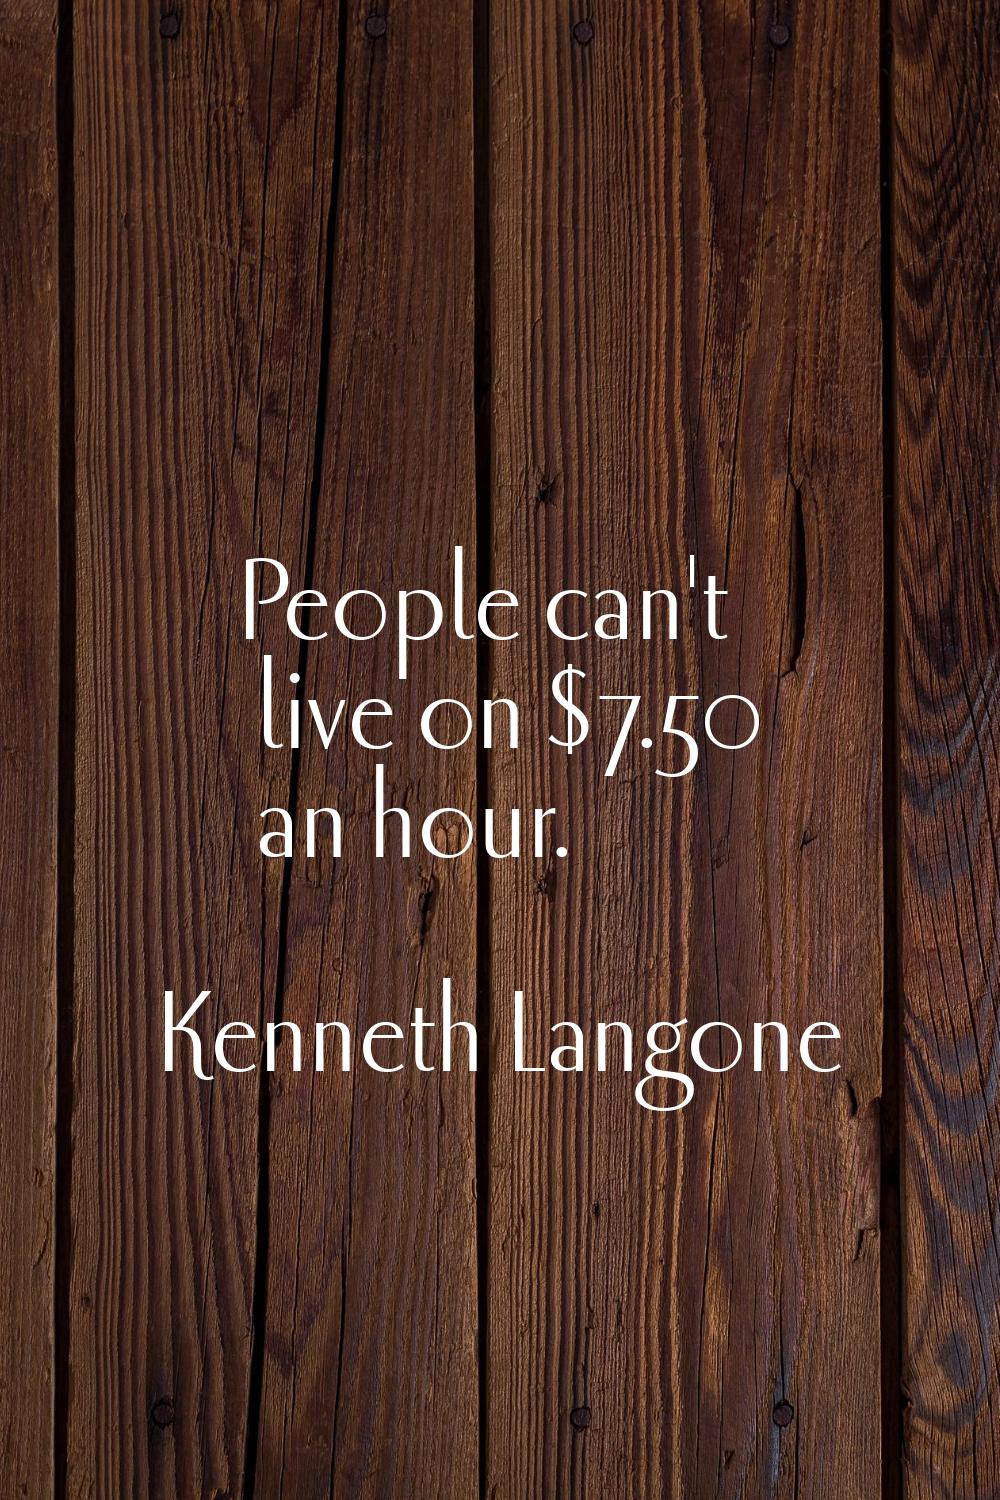 People can't live on $7.50 an hour.